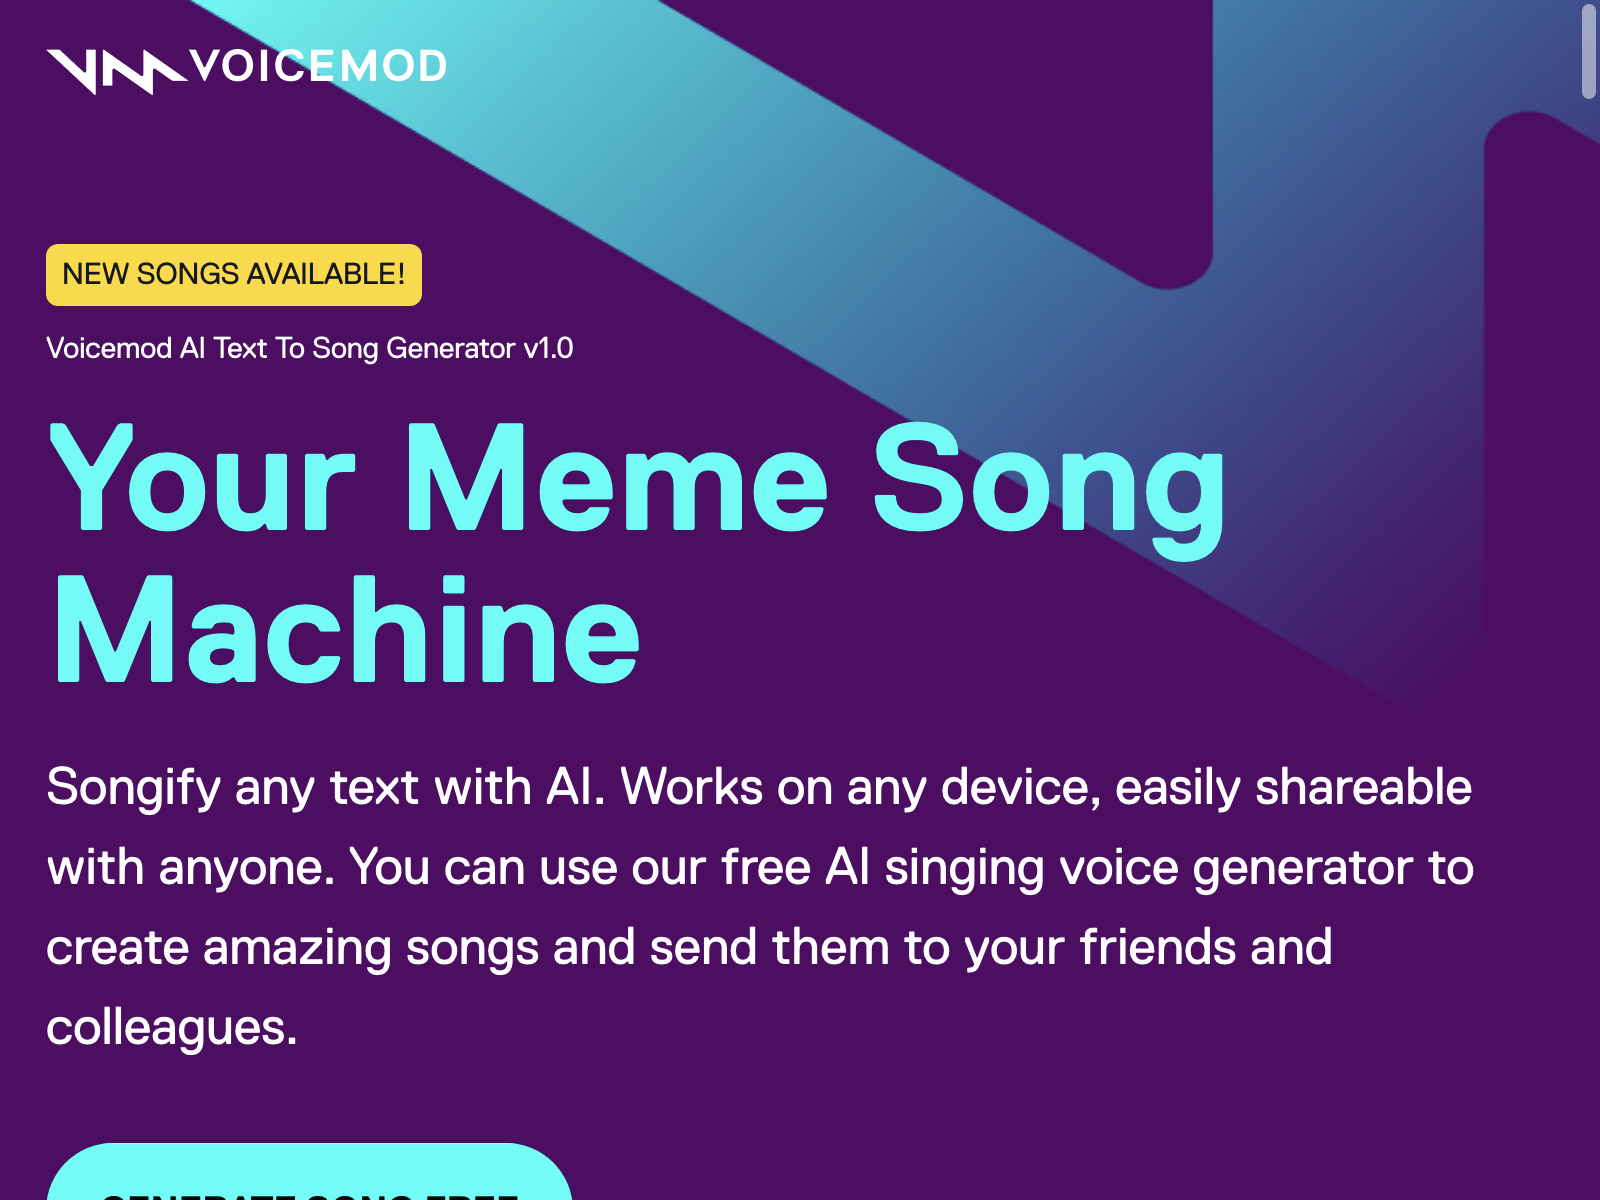 text to song Review: Pros, Cons, Alternatives